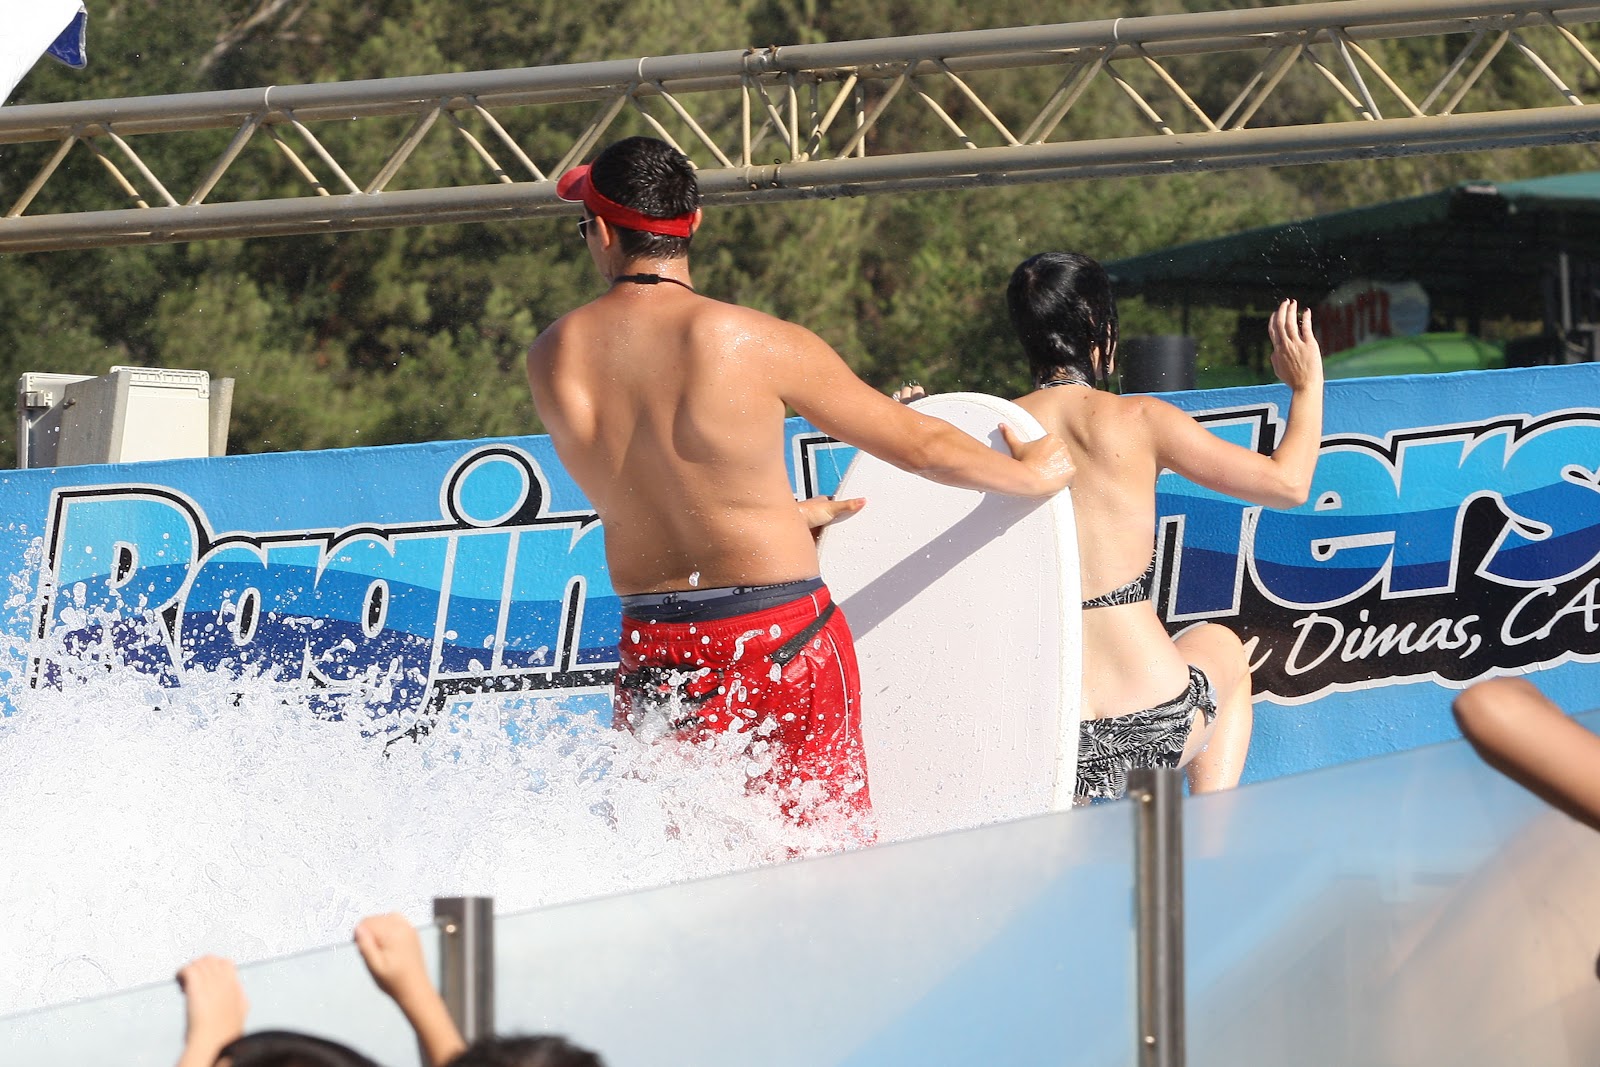 Katy Perry Suffers a Major Wardrobe Mishap Going Down a Water Slide in San Dimas